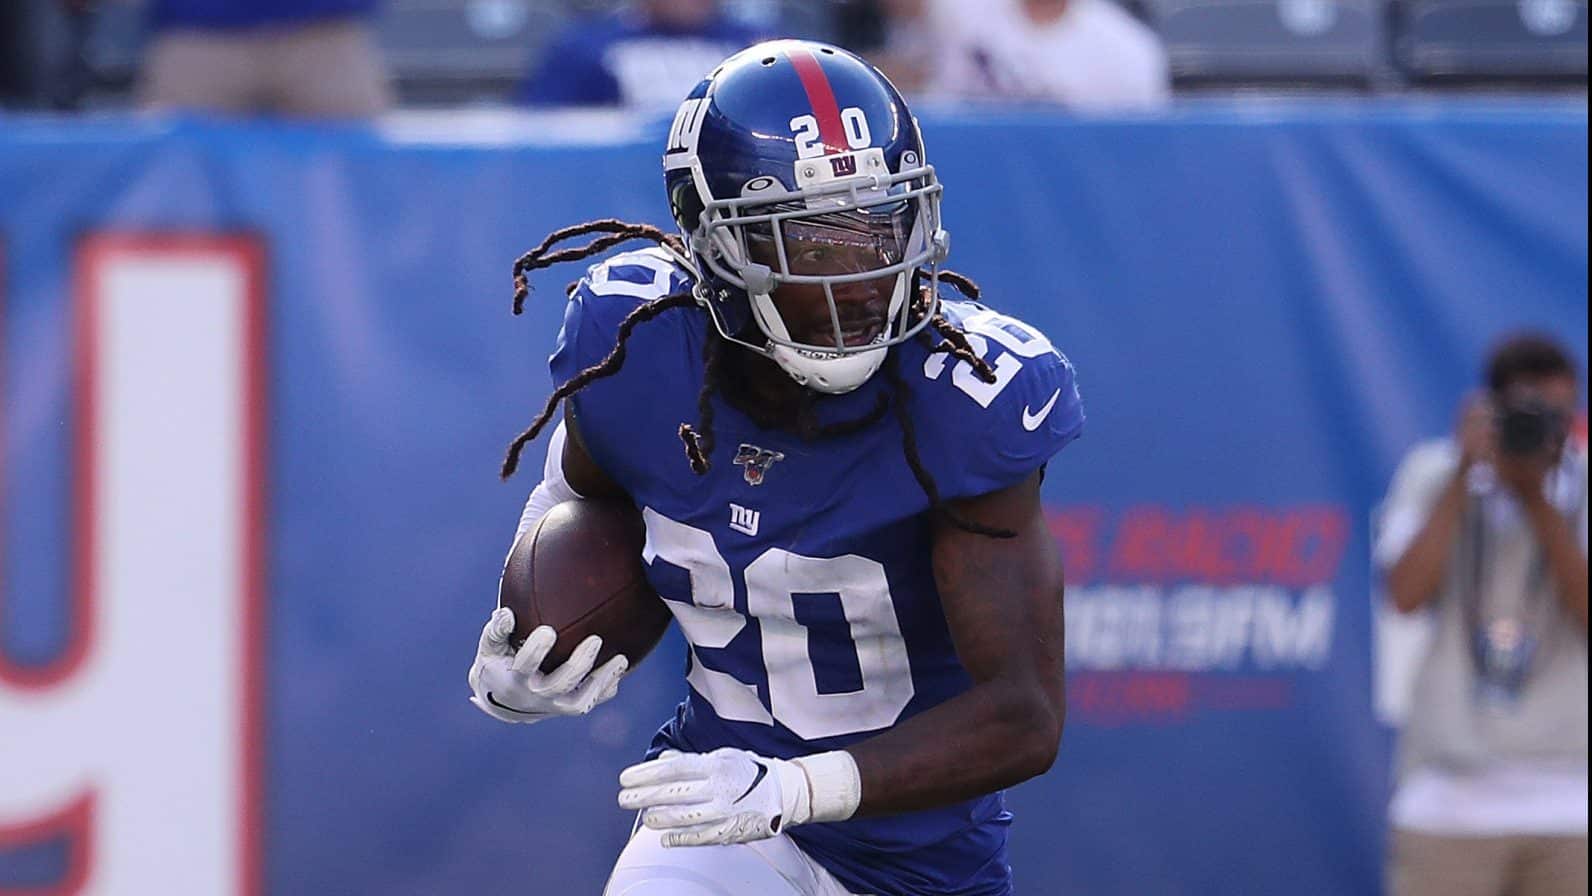 EAST RUTHERFORD, NEW JERSEY - SEPTEMBER 29: Janoris Jenkins #20 of the New York Giants returns an interception against the Washington Redskins during their game at MetLife Stadium on September 29, 2019 in East Rutherford, New Jersey.